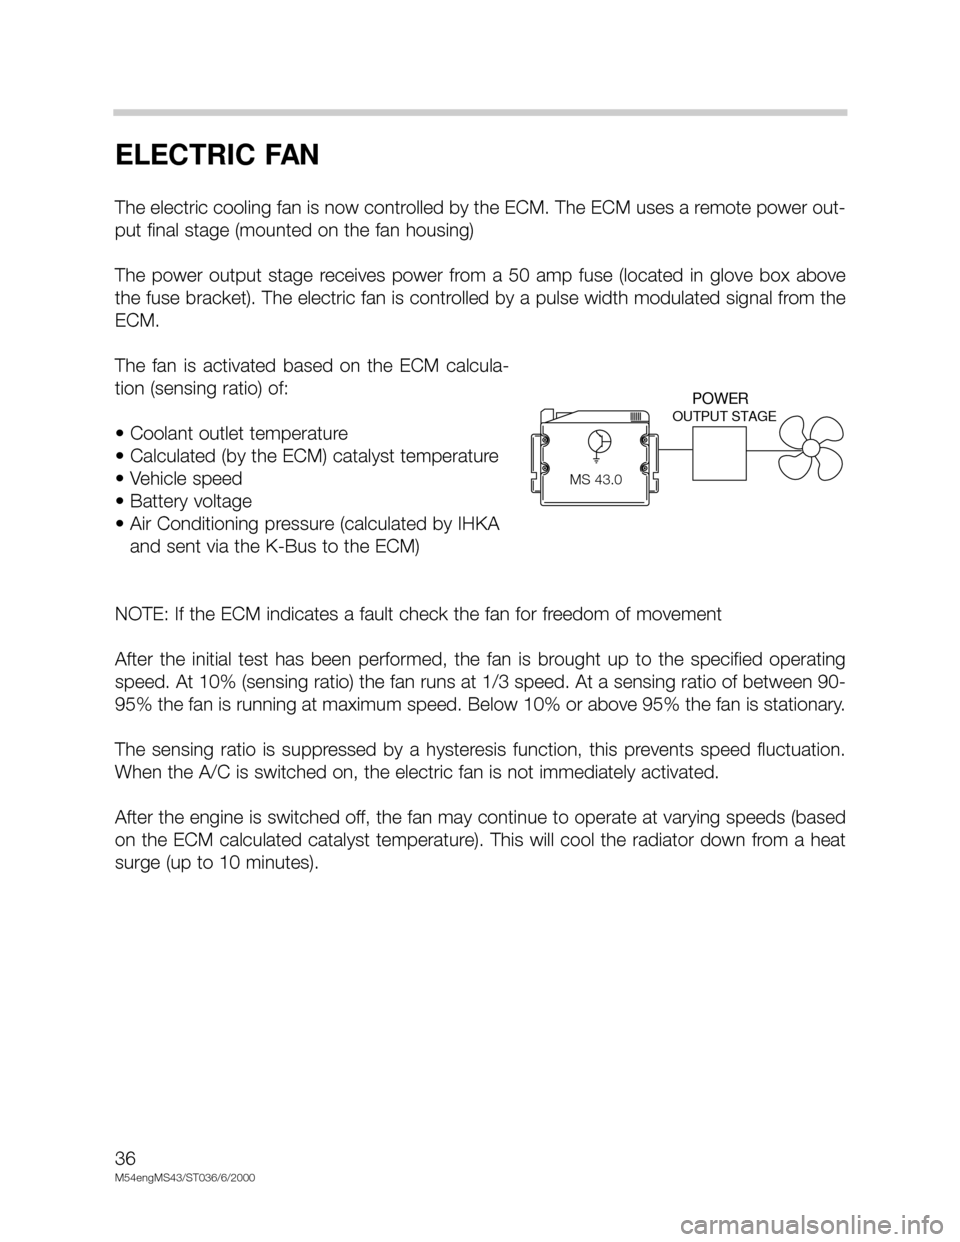 BMW X5 2005 E53 M54 Engine Workshop Manual 36
M54engMS43/ST036/6/2000
ELECTRIC FAN
The electric cooling fan is now controlled by the ECM. The ECM uses a remote power out-
put final stage (mounted on the fan housing)
The  power  output  stage  